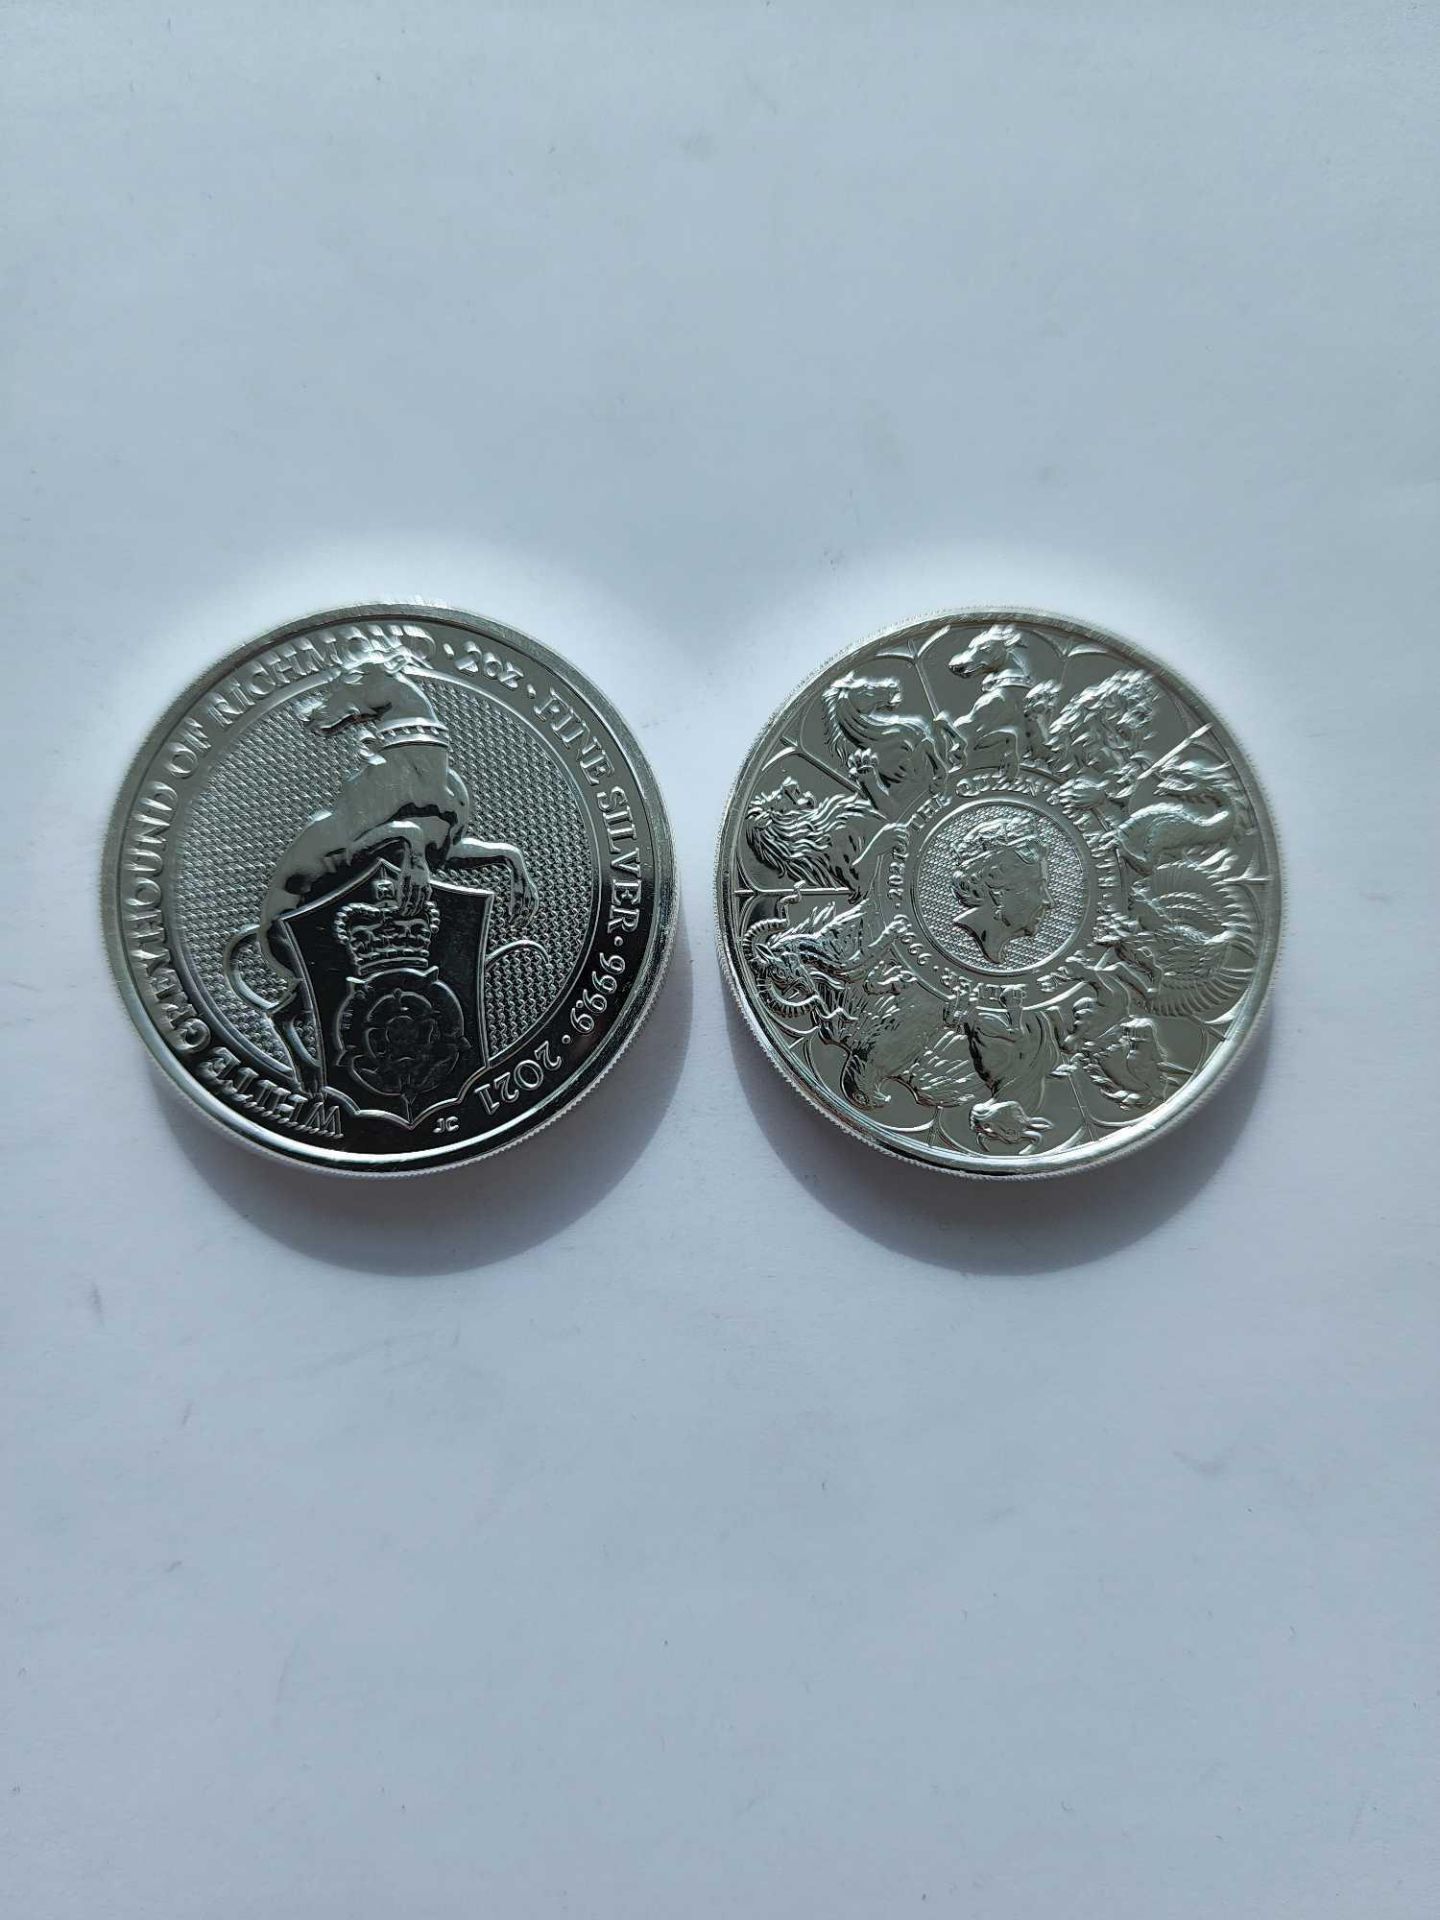 The Queens Beasts and Greyhound 2 coin set (4 oz total)